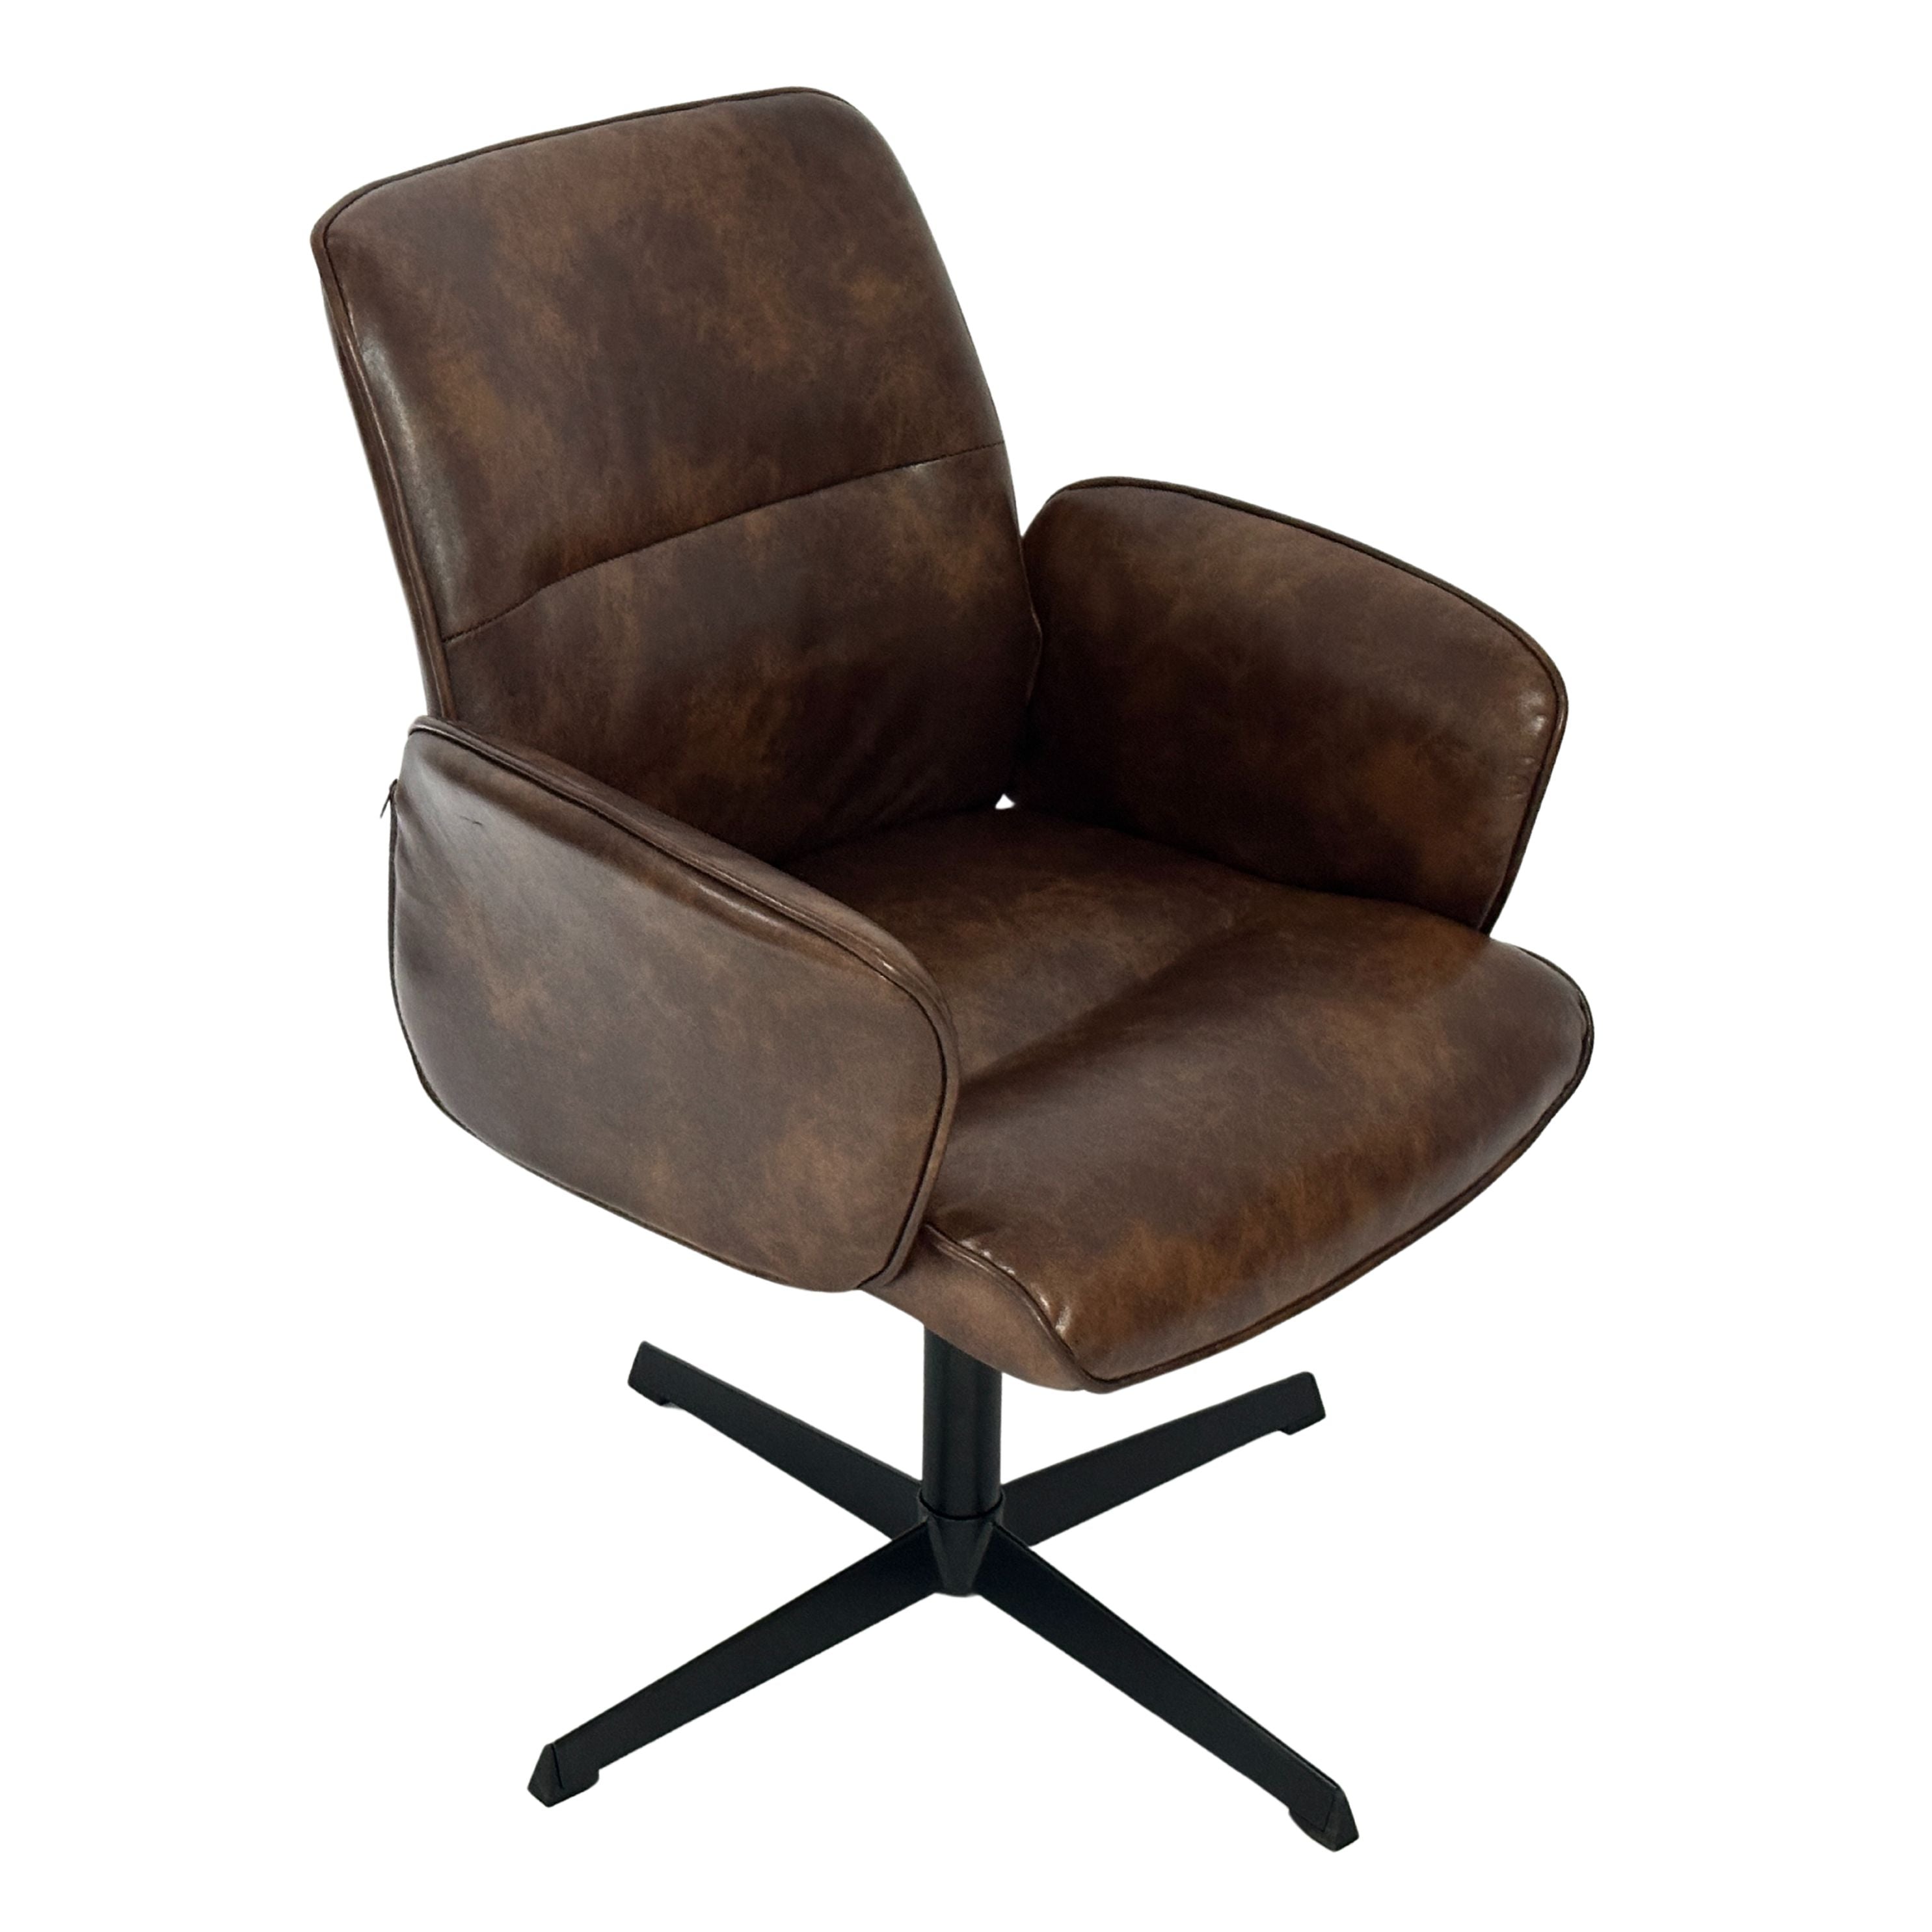 Thomasina Relax Faux Leather Accent Chairs